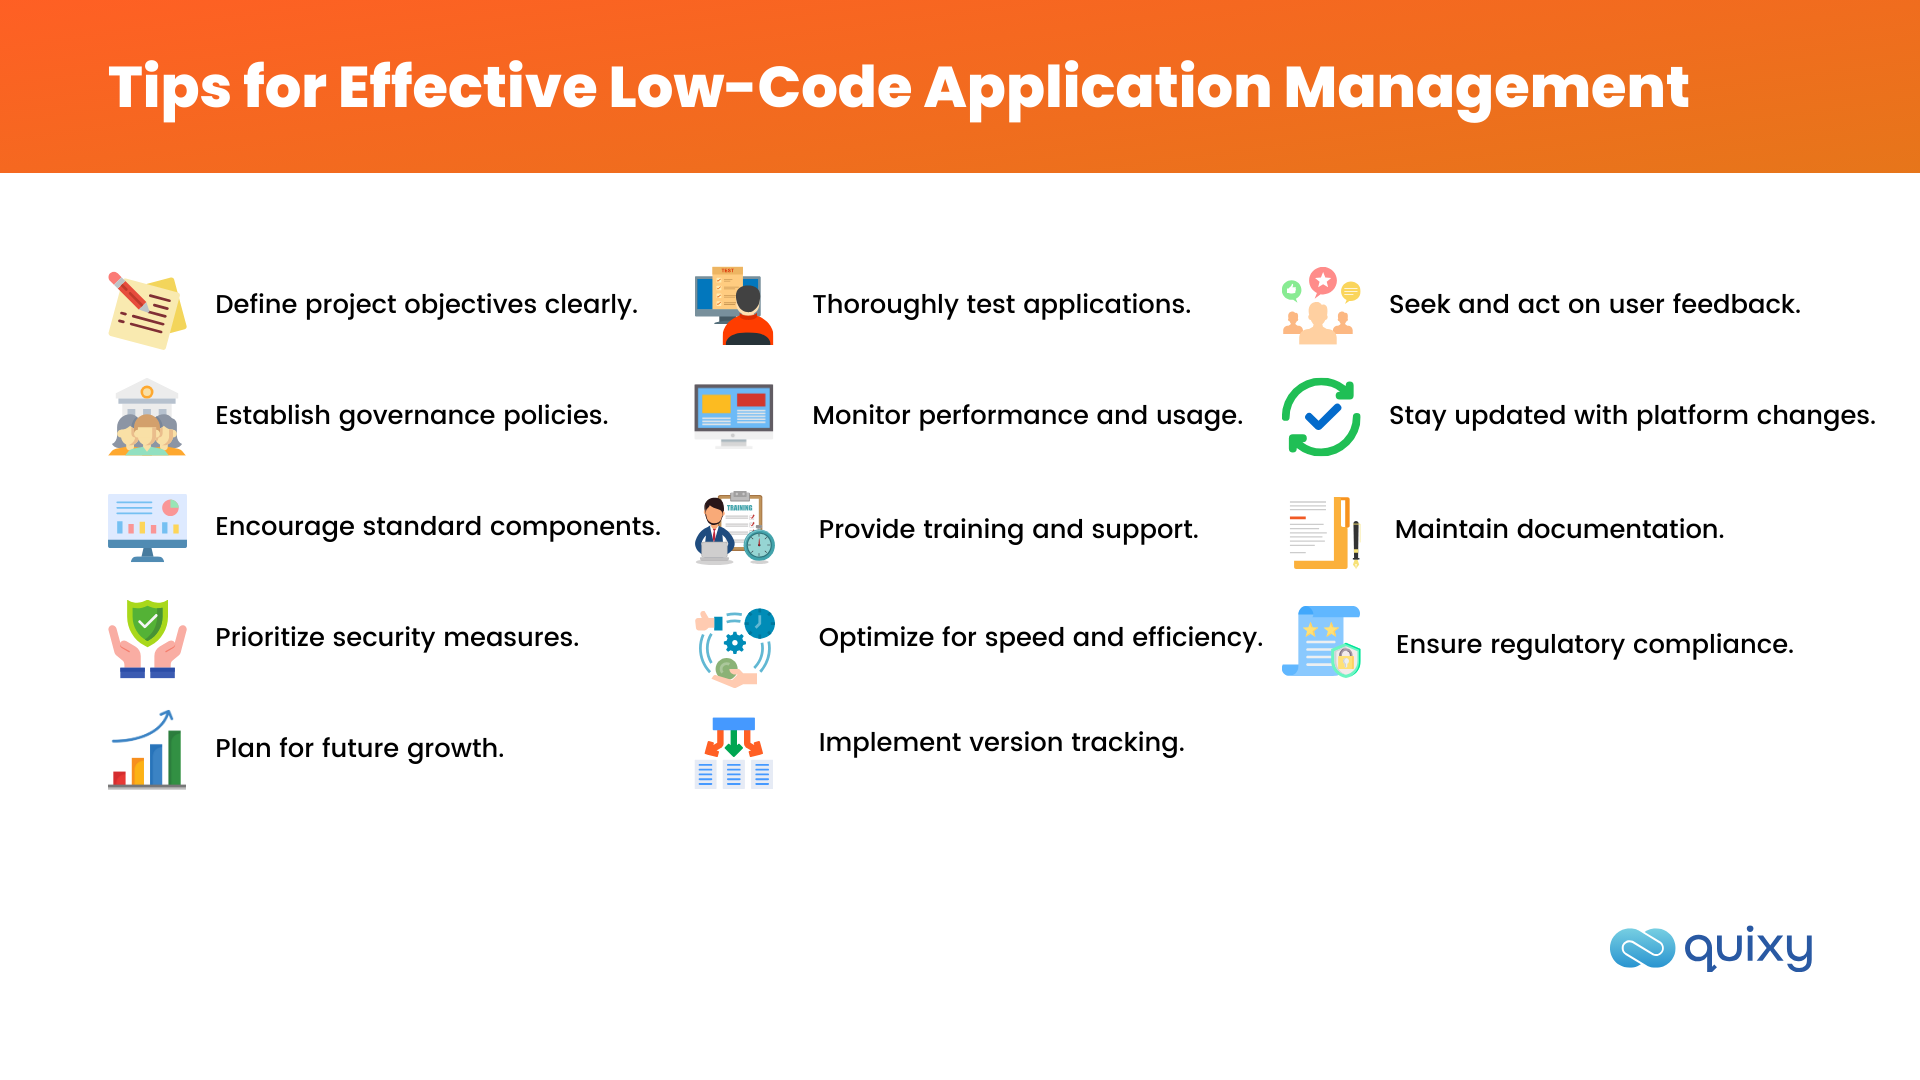 tips for Low-Code Application Management